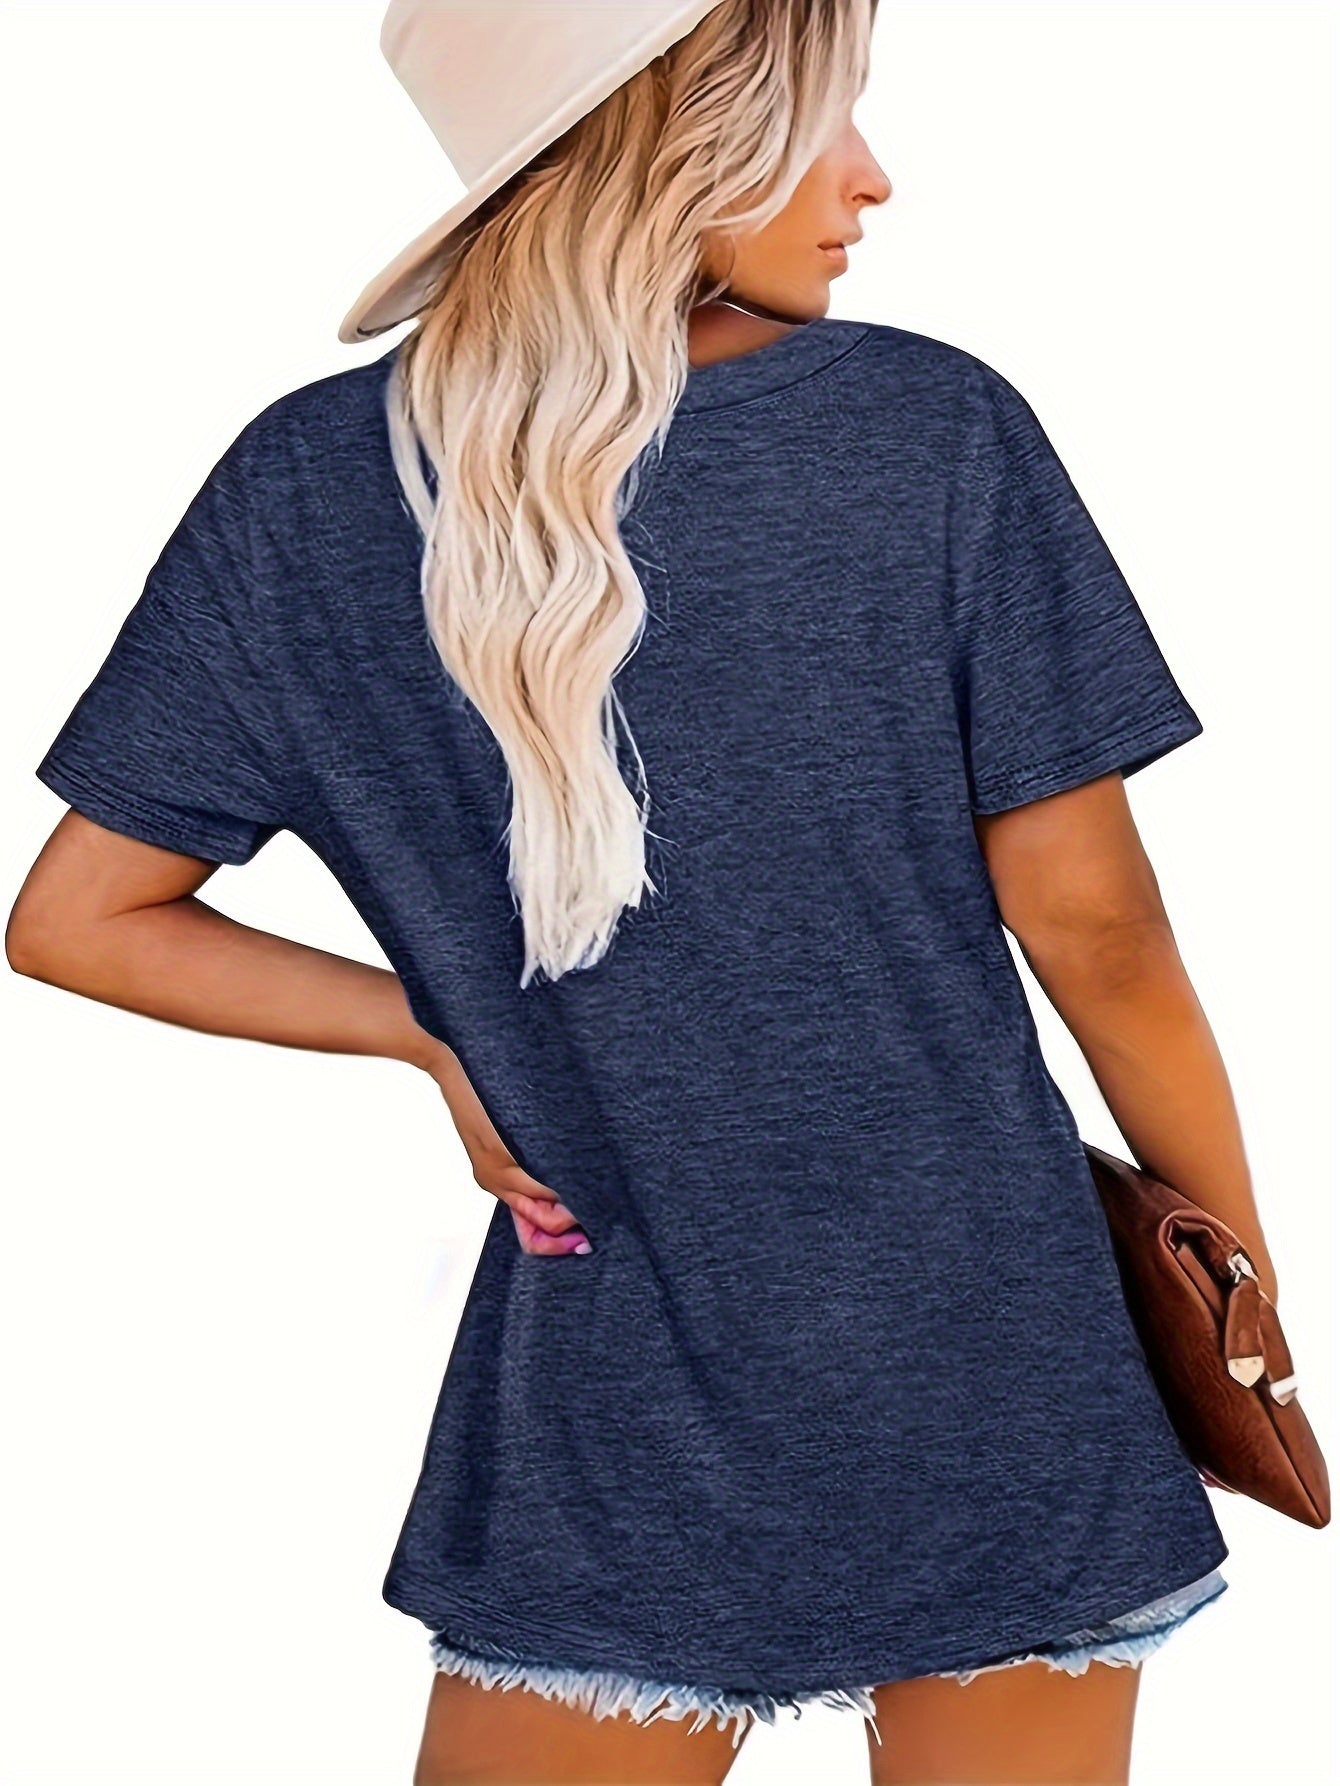 Letter Print Crew Neck T-shirt, Casual Short Sleeve Top For Spring & Summer, Women's Clothing